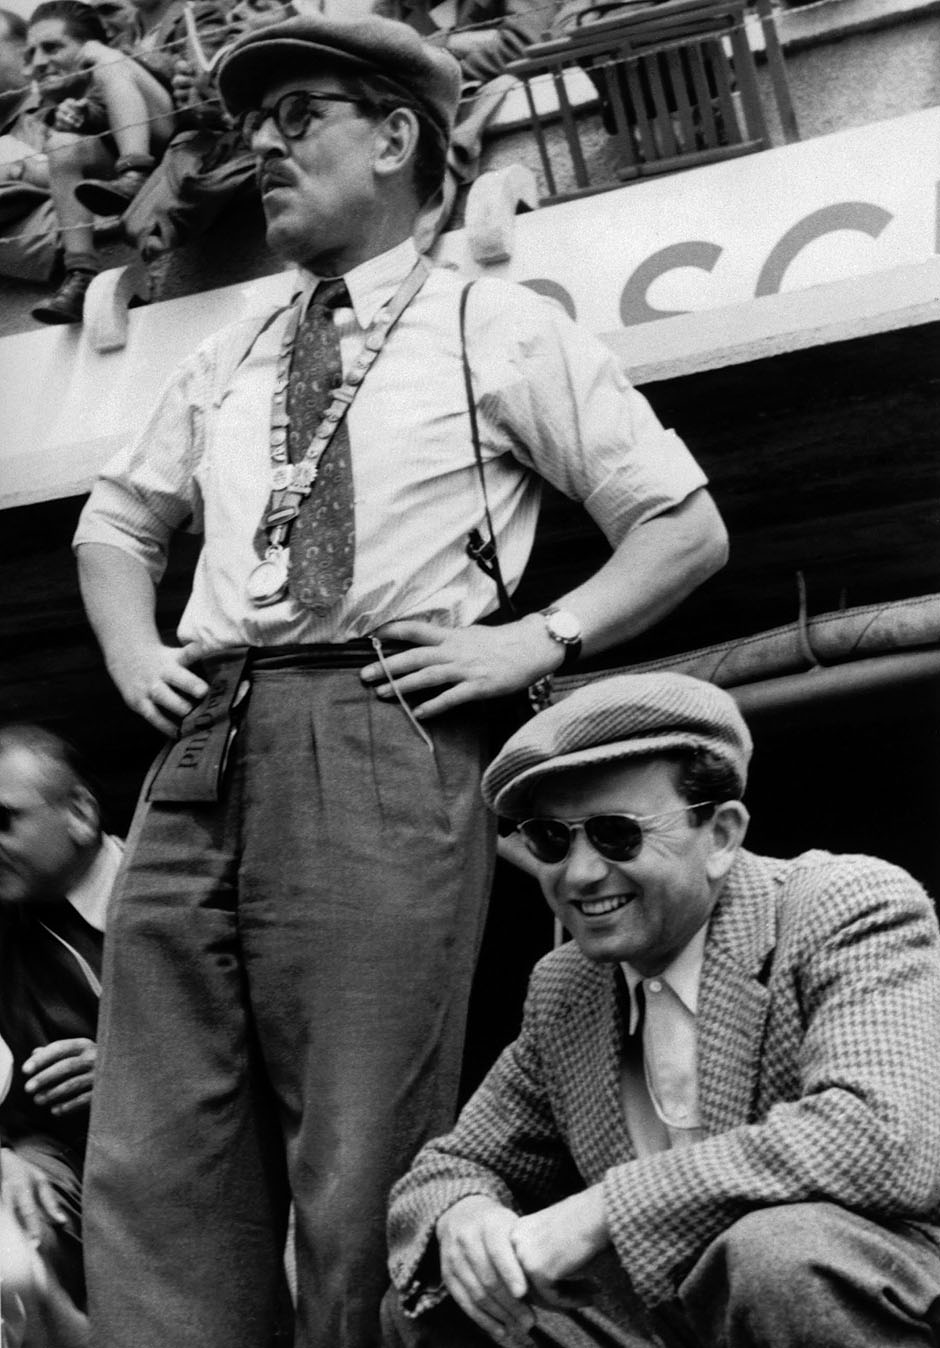 1953 Le Mans 24H. Ferry Porsche and Baron Fritz Huschke von Hanstein who joined Porsche in 1952 and was not only in charge of the press office and Porsche's motor racing activities, but was also a successful works racing driver, photographer and film-maker.